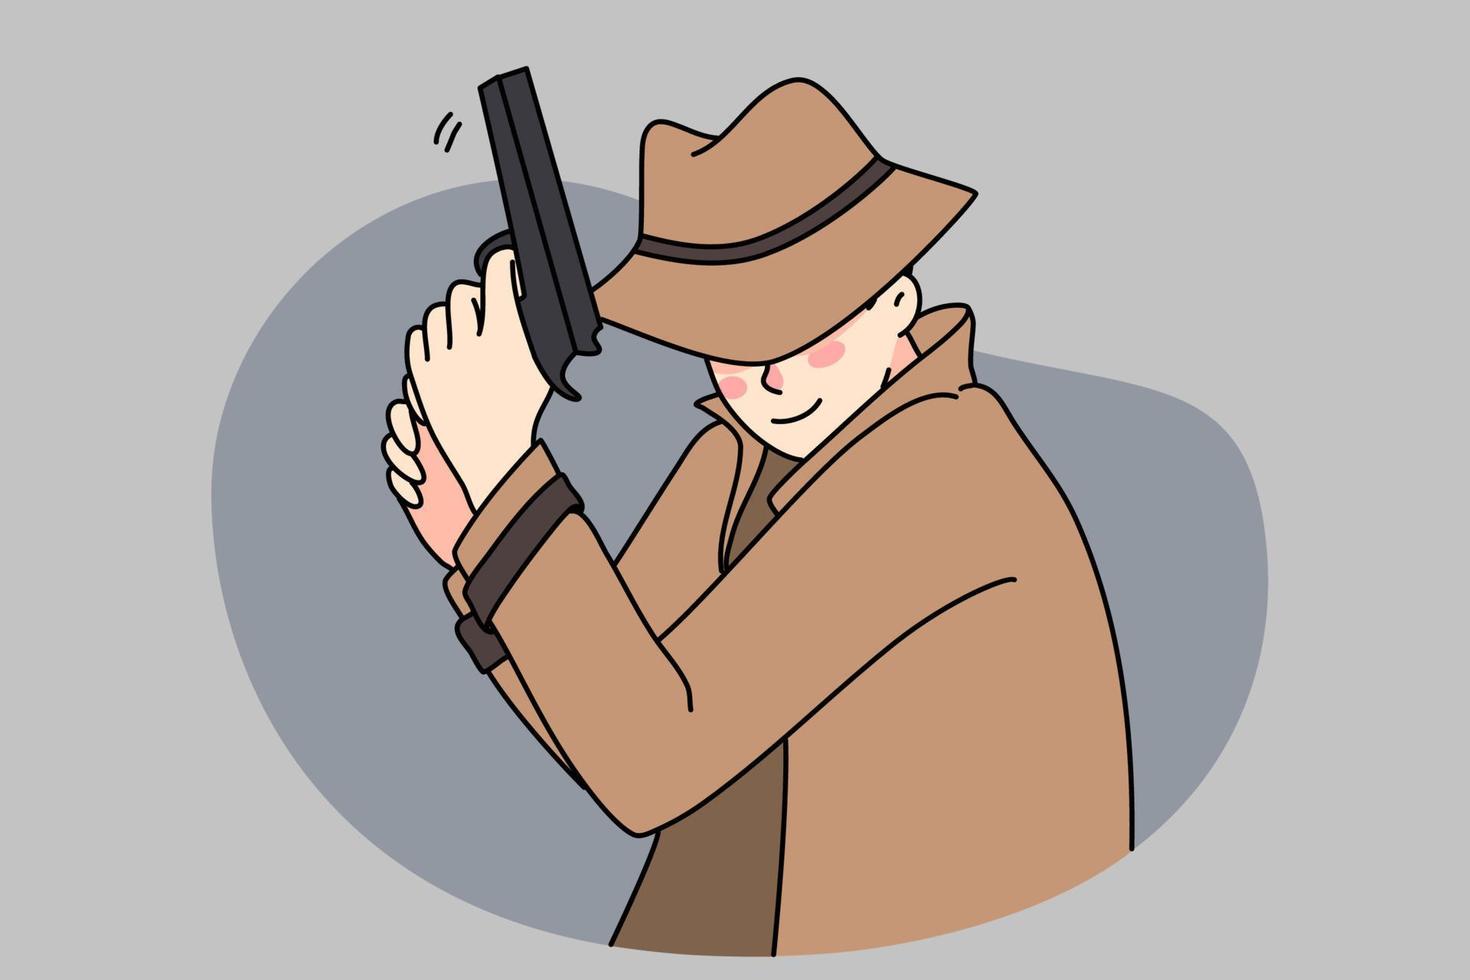 Male detective in coat and hat holding gun spying for criminal or suspect. Man spy or police officer undercover pursue offender with firearm. Private agent work. Vector illustration.